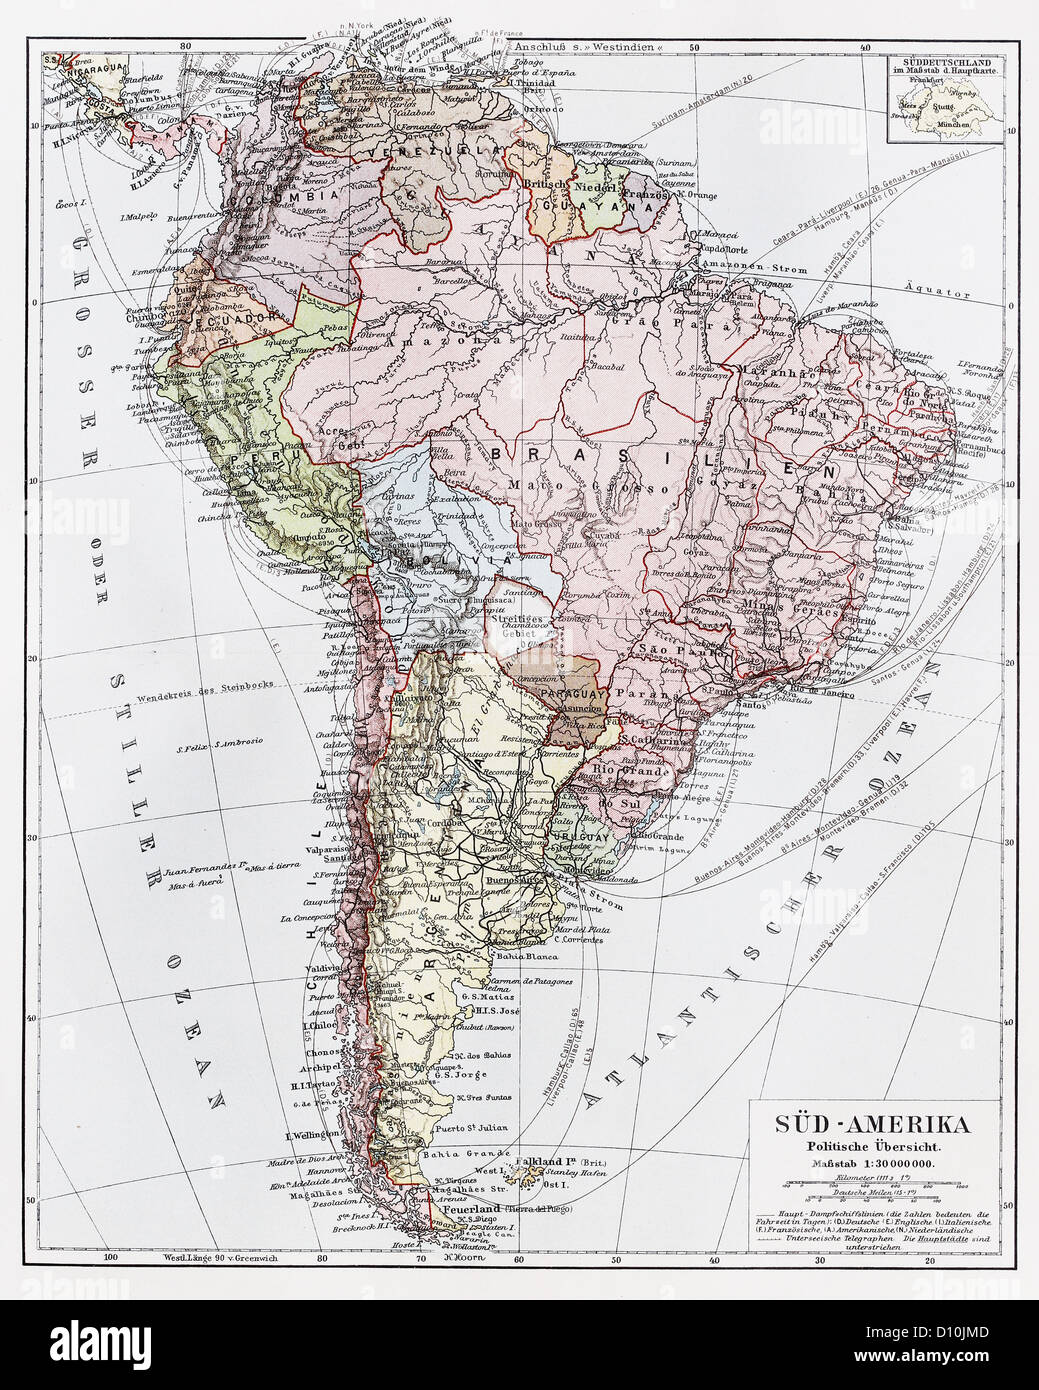 Vintage map of South America, political overview rom the end of 19th century Stock Photo